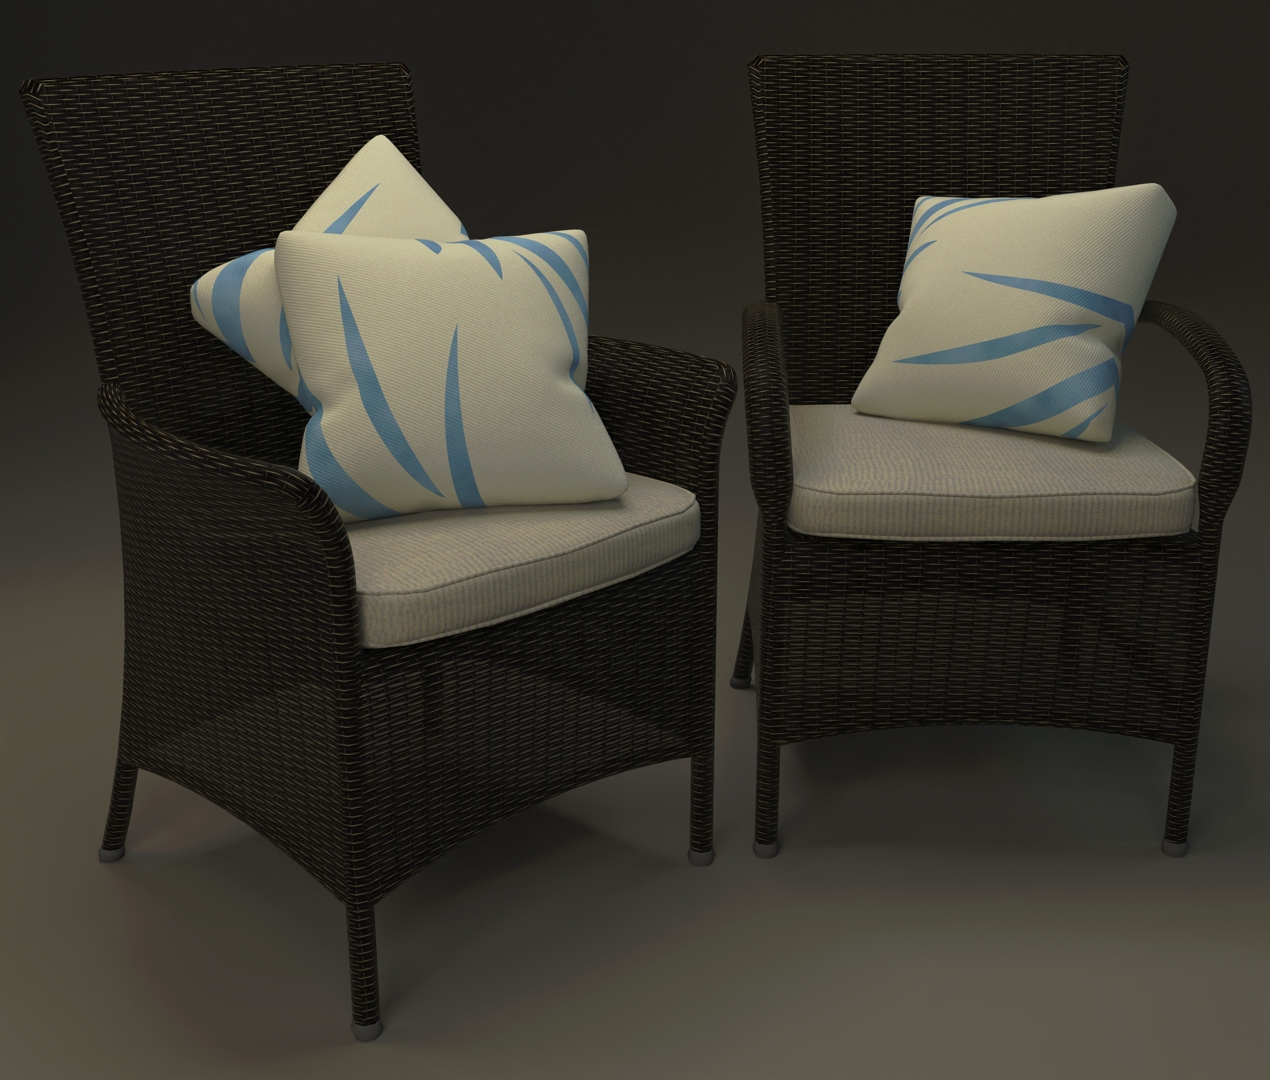 Pillows-CaneLineChairs_leavesblue.jpg